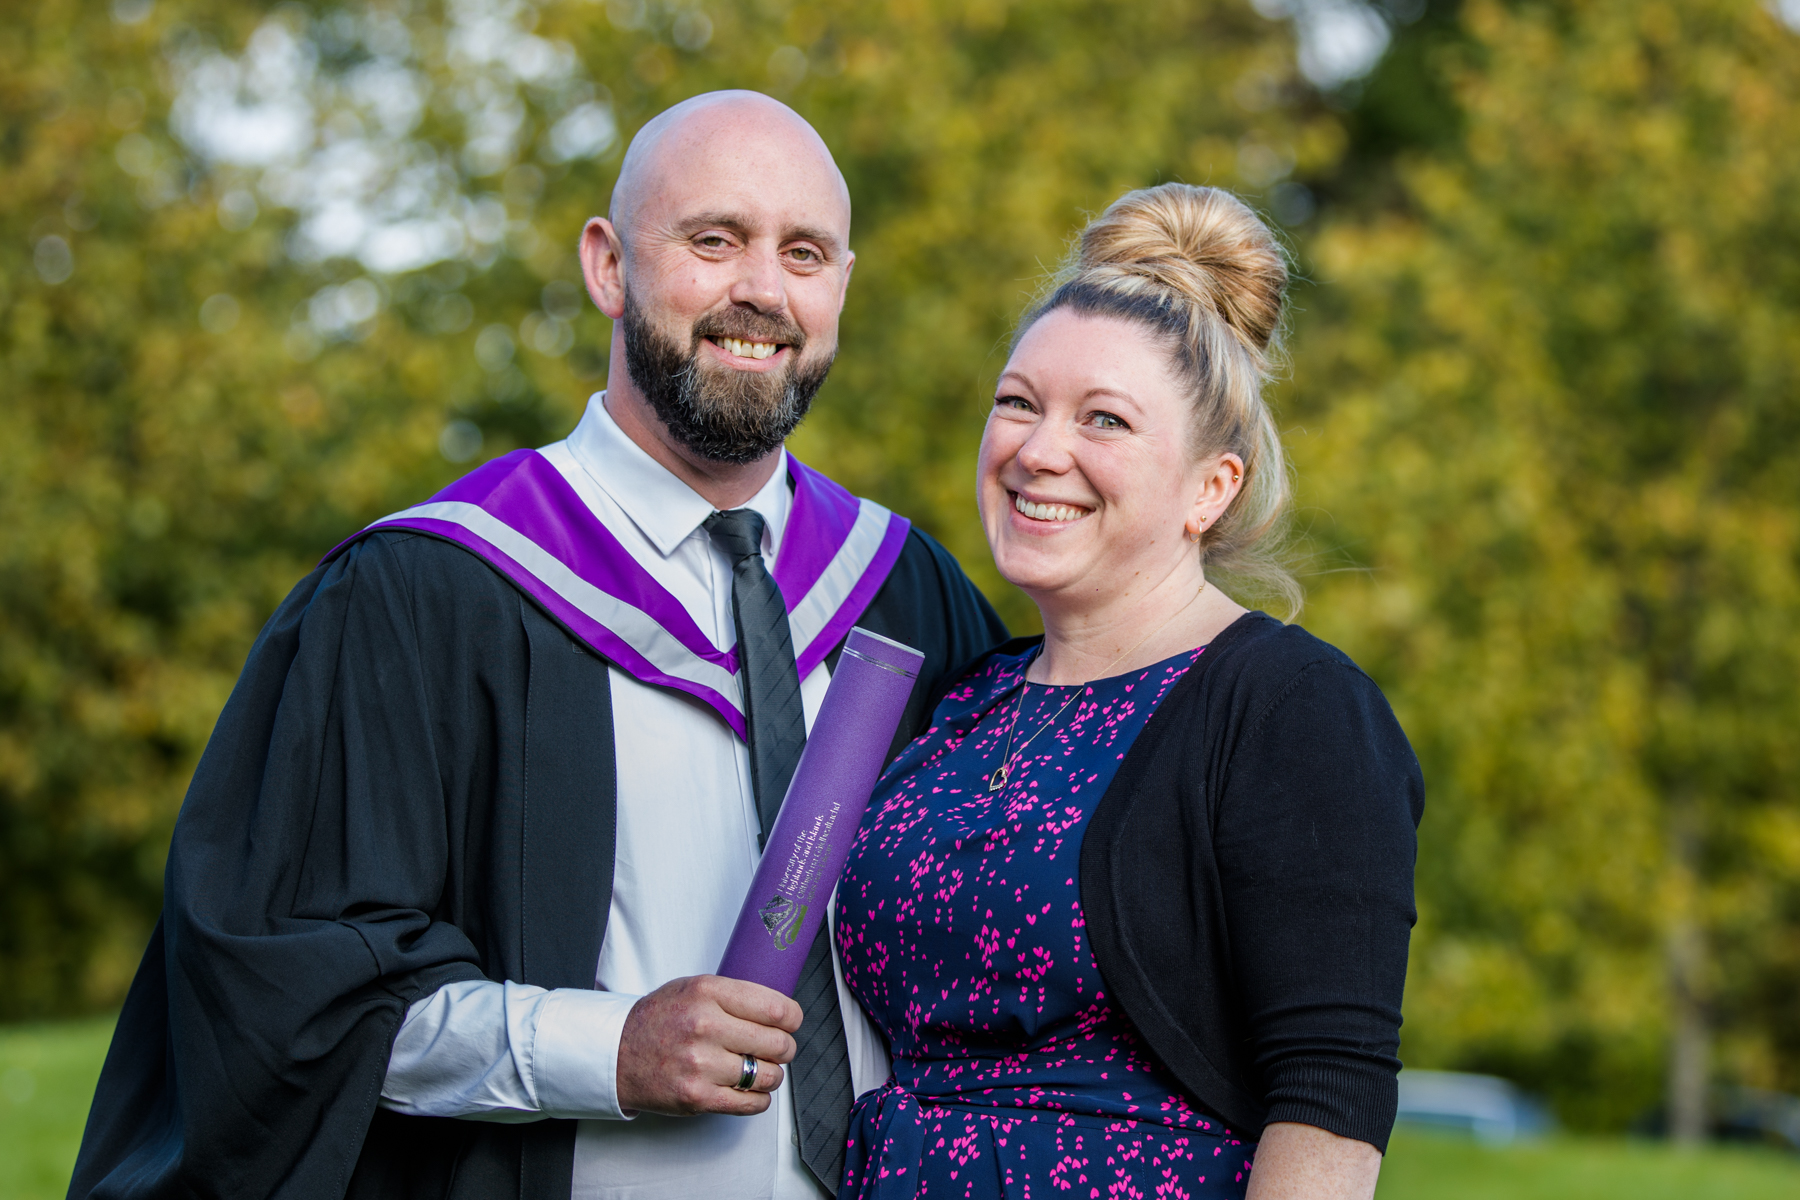 Graduate Alastair Watt is pictured with his wife Jane, a former graduate of North College/UHI